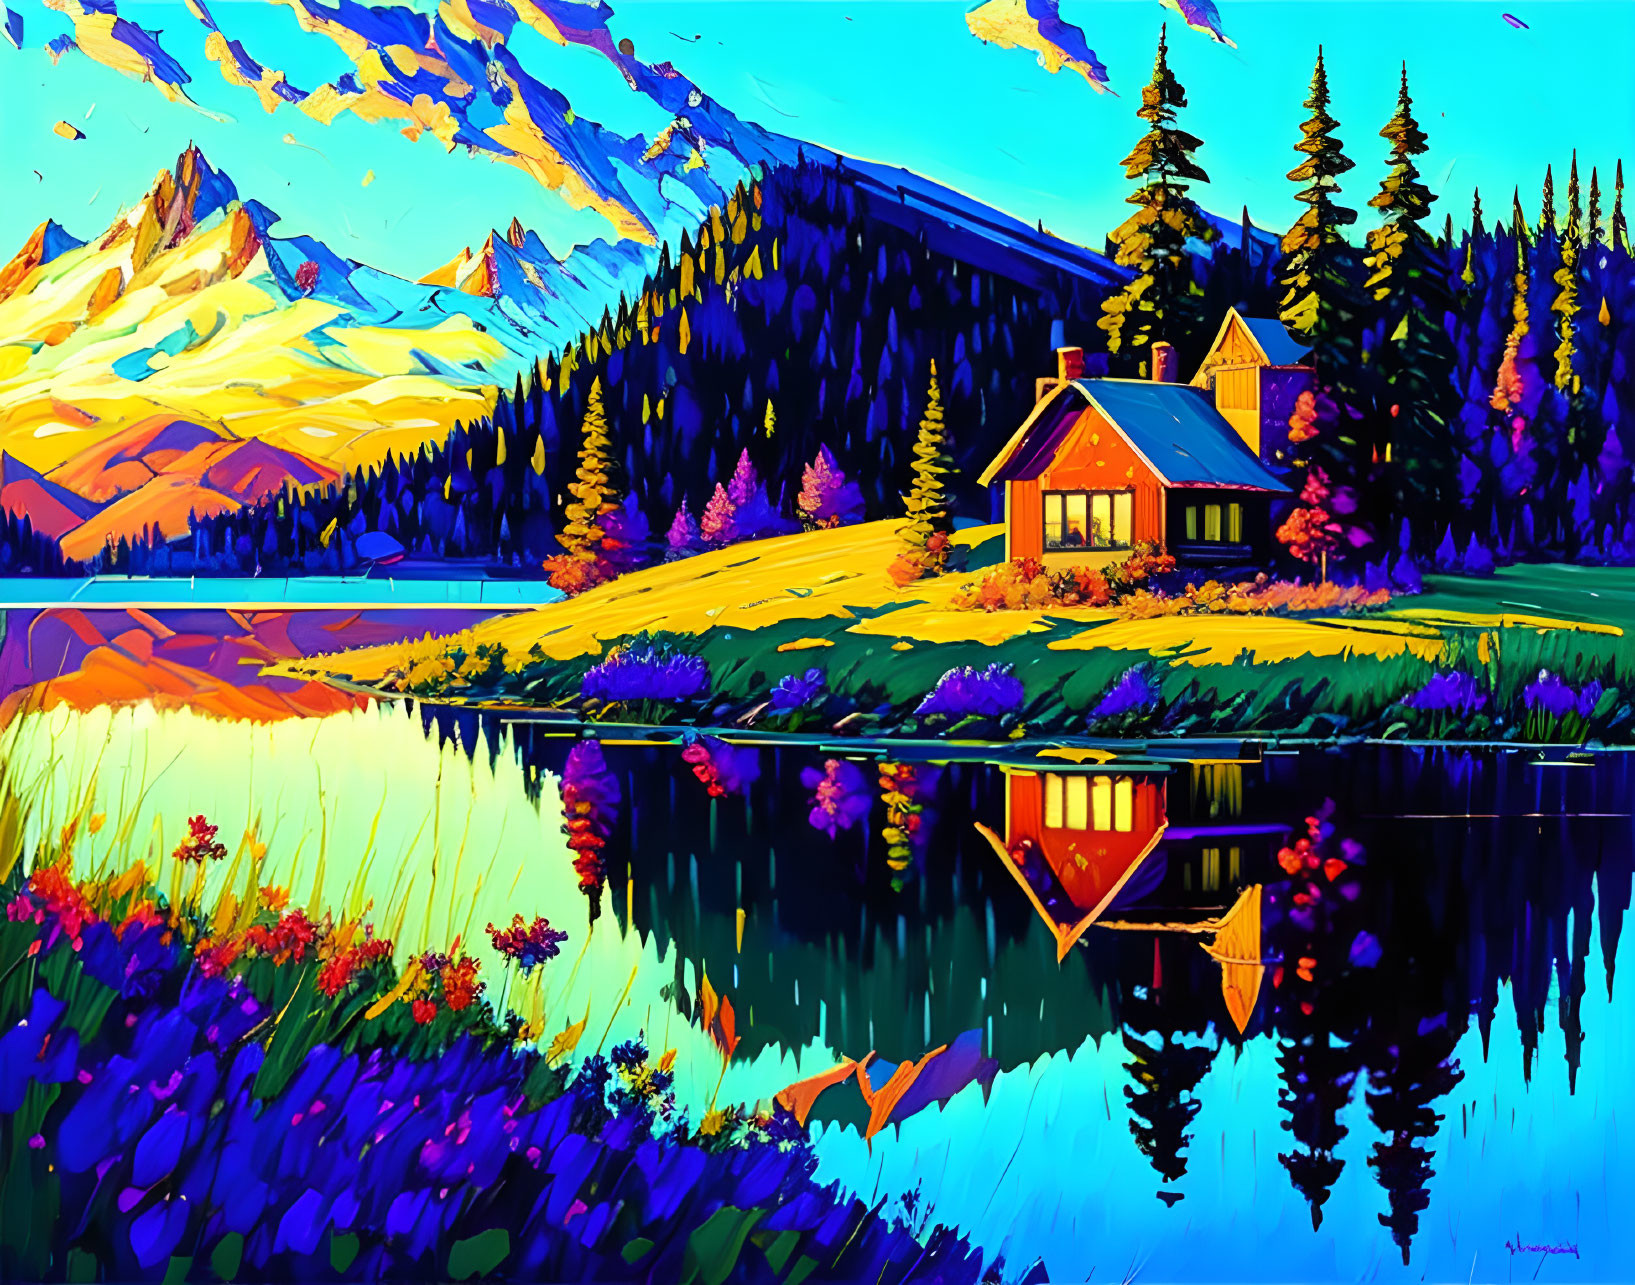 Scenic lakeside cabin painting with colorful trees and mountains